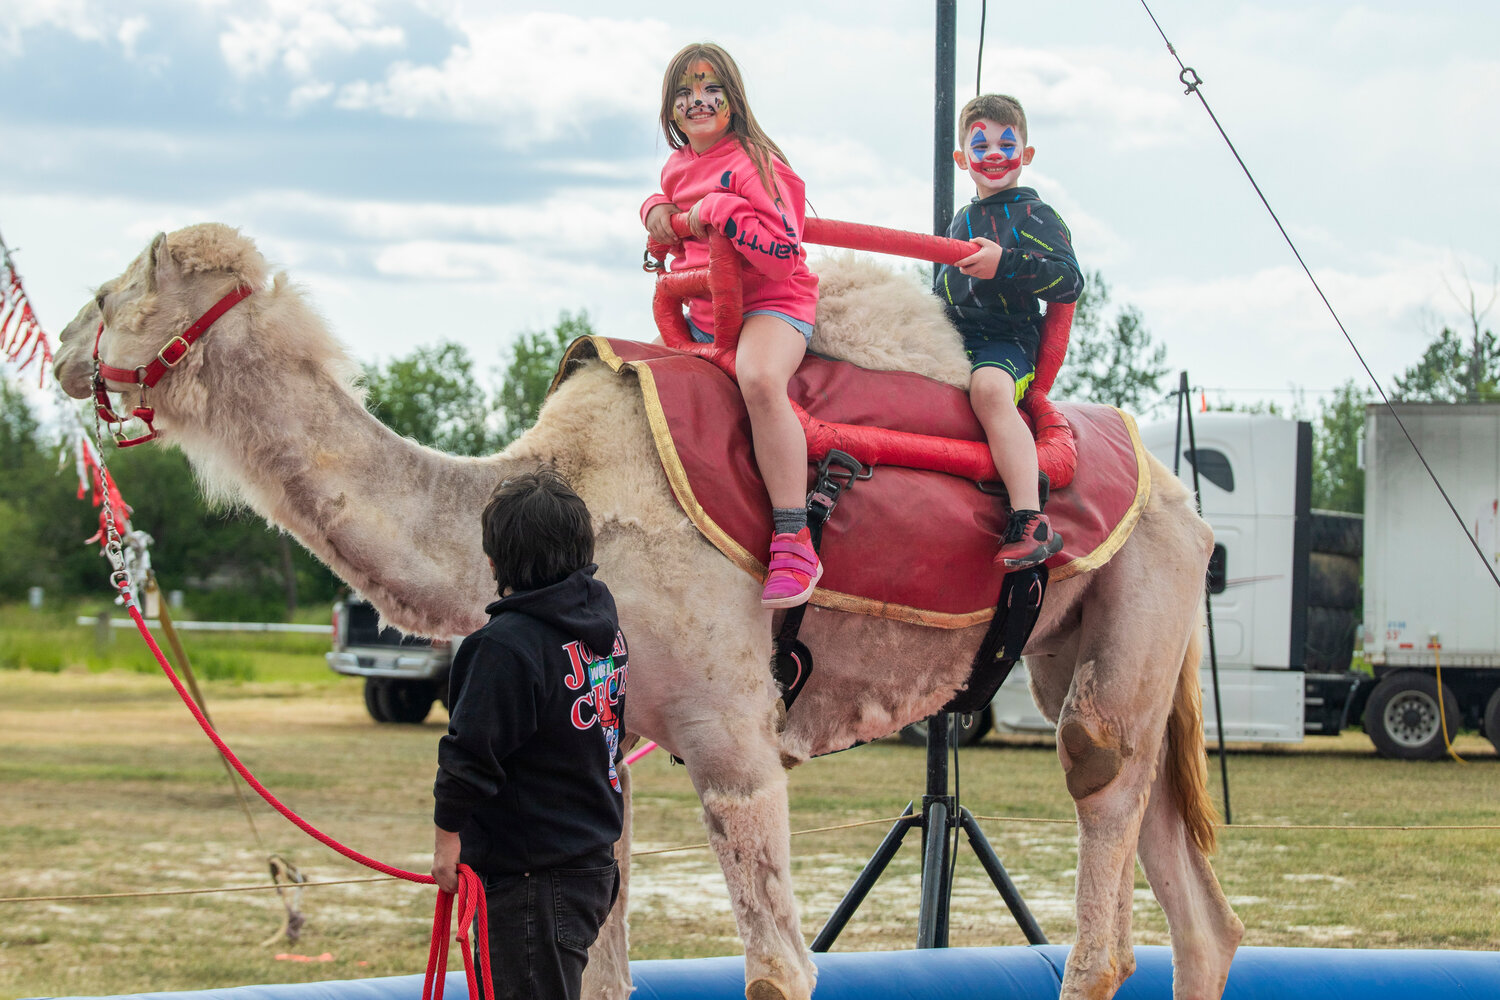 Madilyn Lanning, 9, and her brother Maddox, 6, smile while riding a camel at the Southwest Washington Fairgrounds during the Jordan World Circus show on Wednesday, May 31.